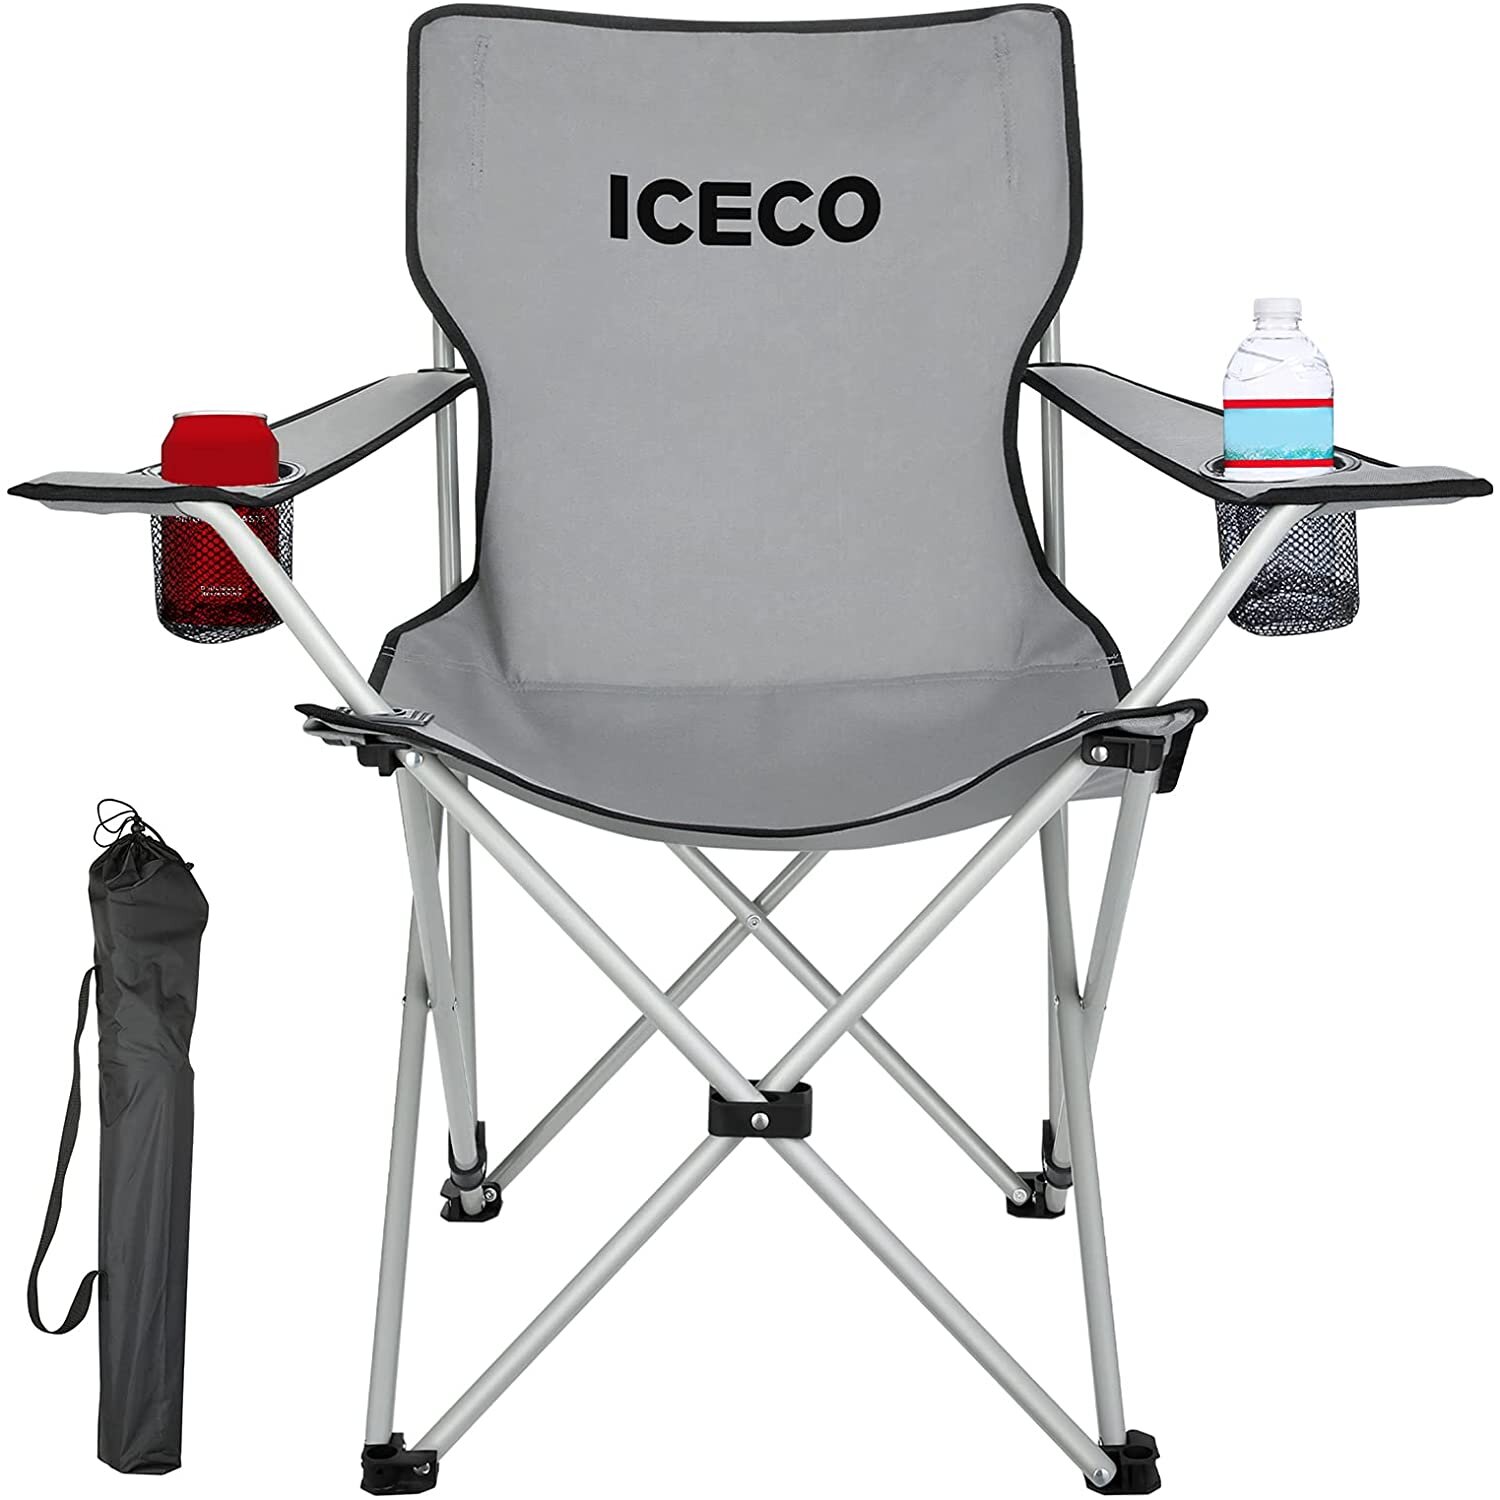 Outdoors Festival lightweight portable compact foldable seat with carry bag and cup holder for Hiking Fishing Beach etc. Park Picnic Folding camping chairs Travel Ultralight Folding Chair